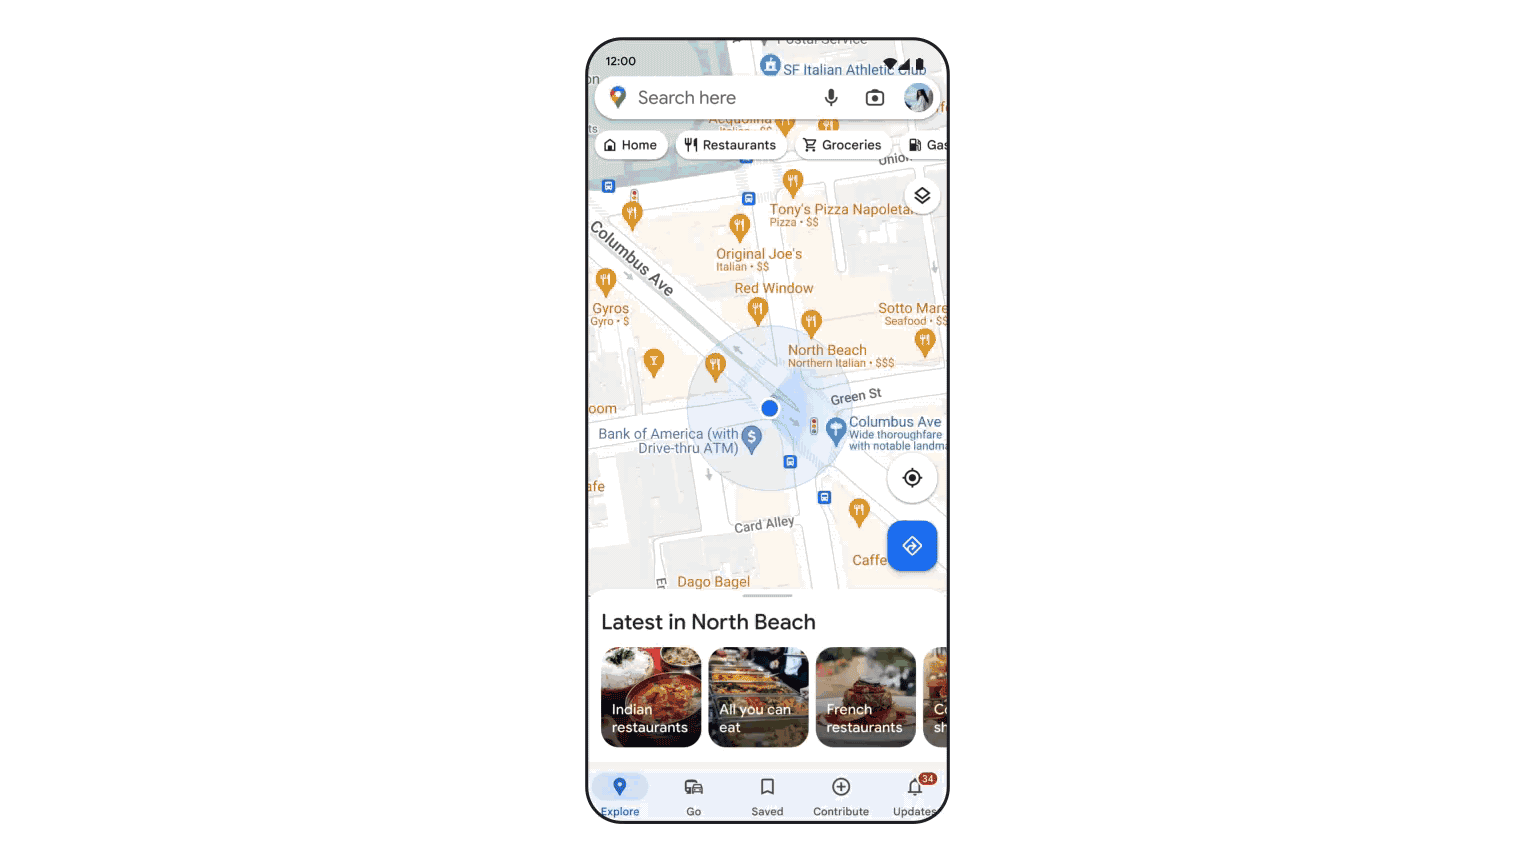 GIF of search with Live View, which shows how you can lift your phone to find places like ATMs overlaid on top of the map